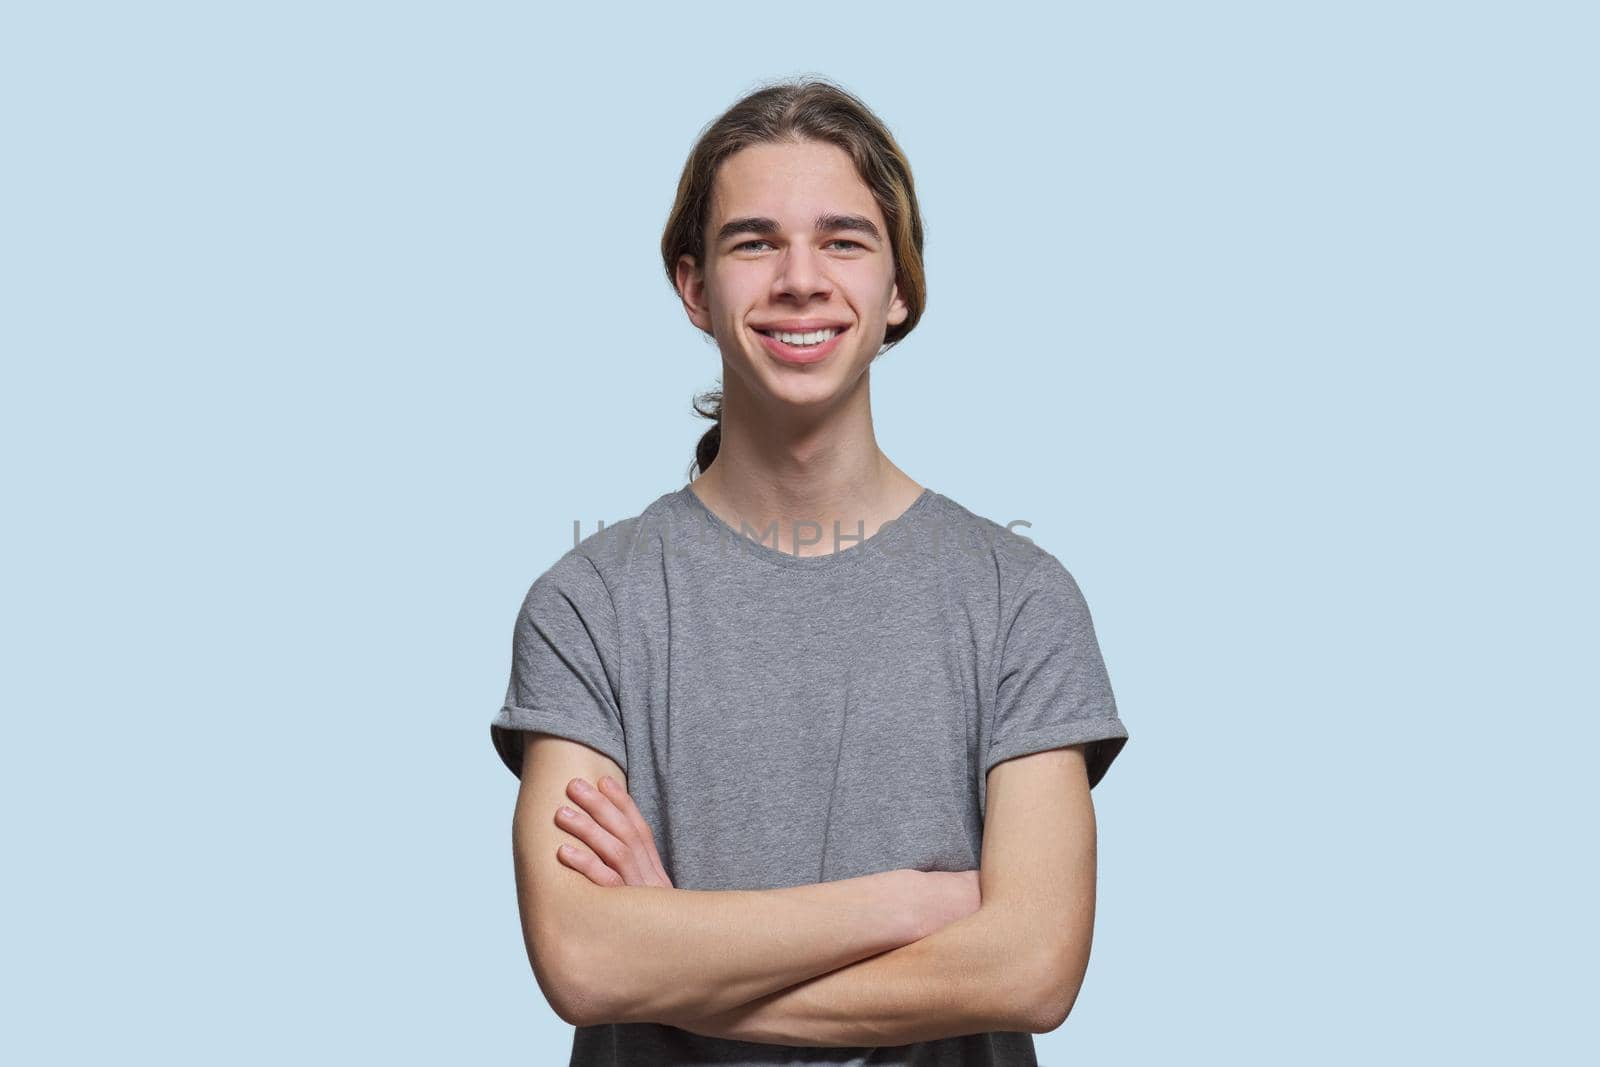 Portrait of happy smiling guy 15, 16 years old teenager with crossed arms, handsome trendy male looking at the camera on light studio background